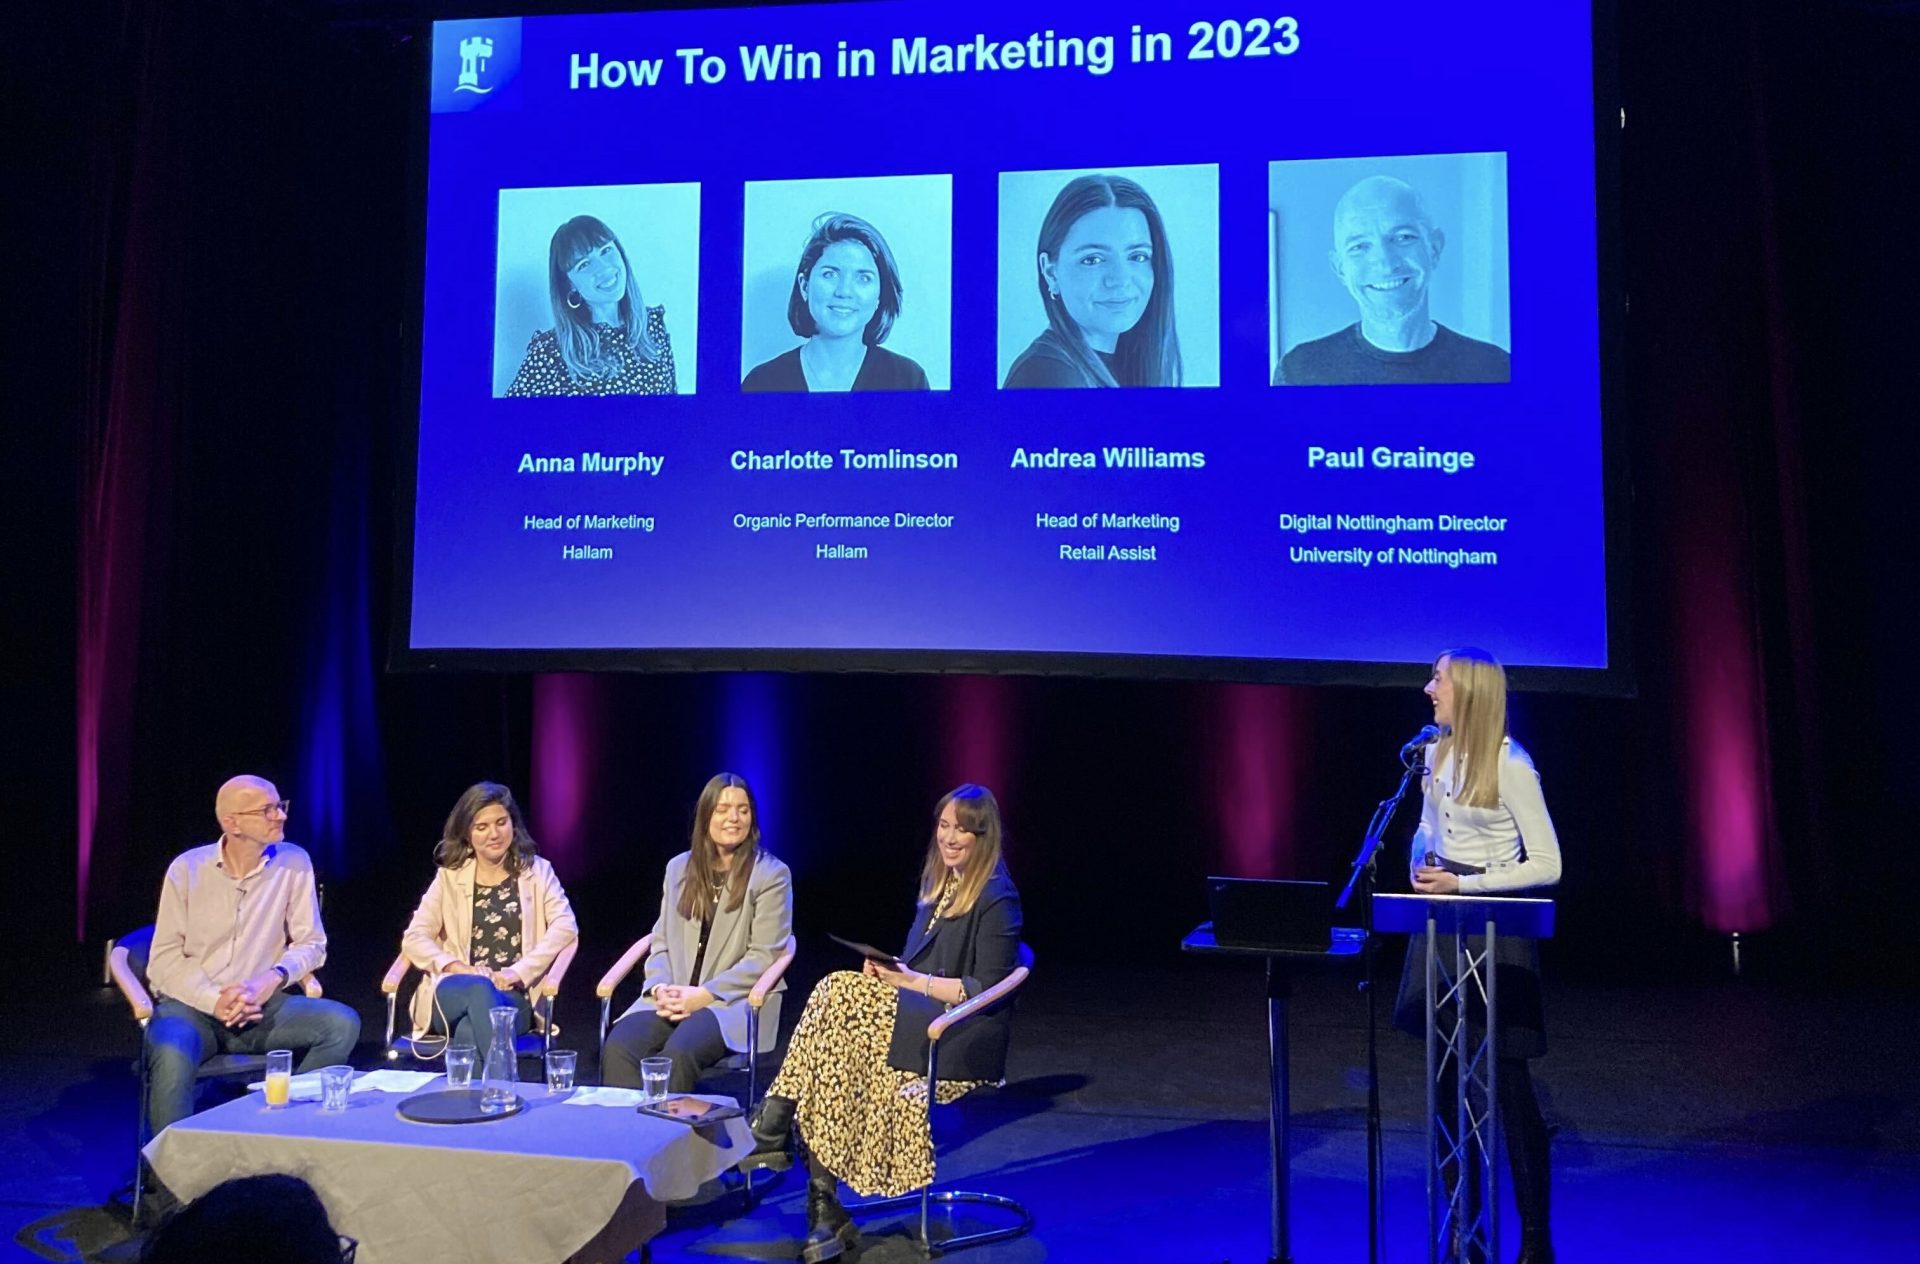 How to win in marketing in 2023: a round-up of our partner event with UoN